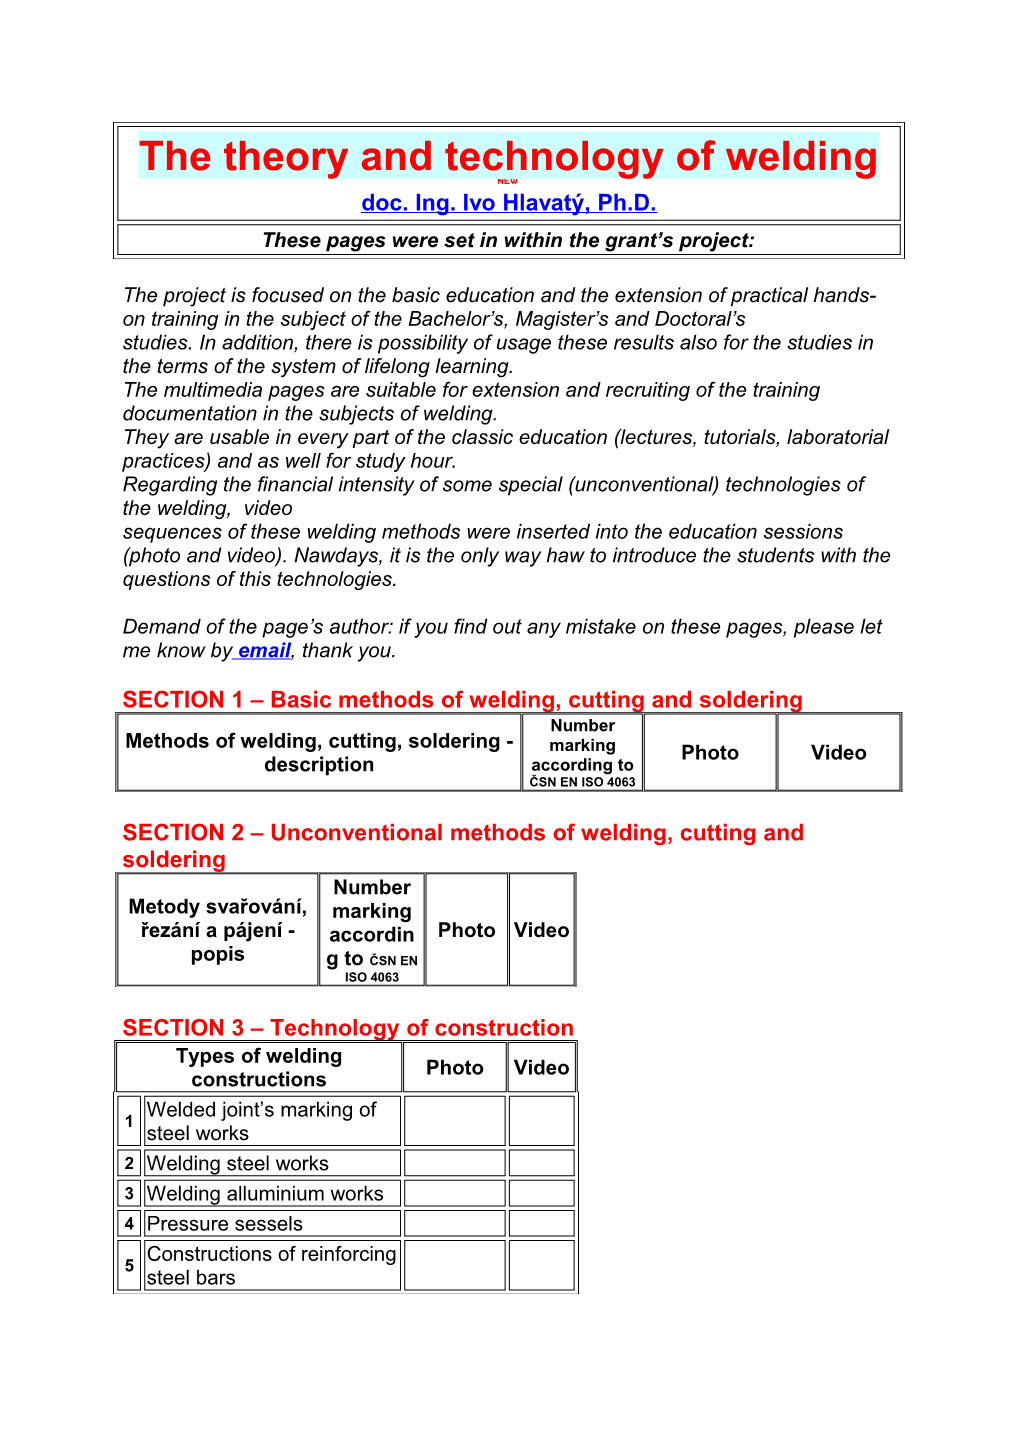 SECTION 1 Basic Methods of Welding, Cutting and Soldering